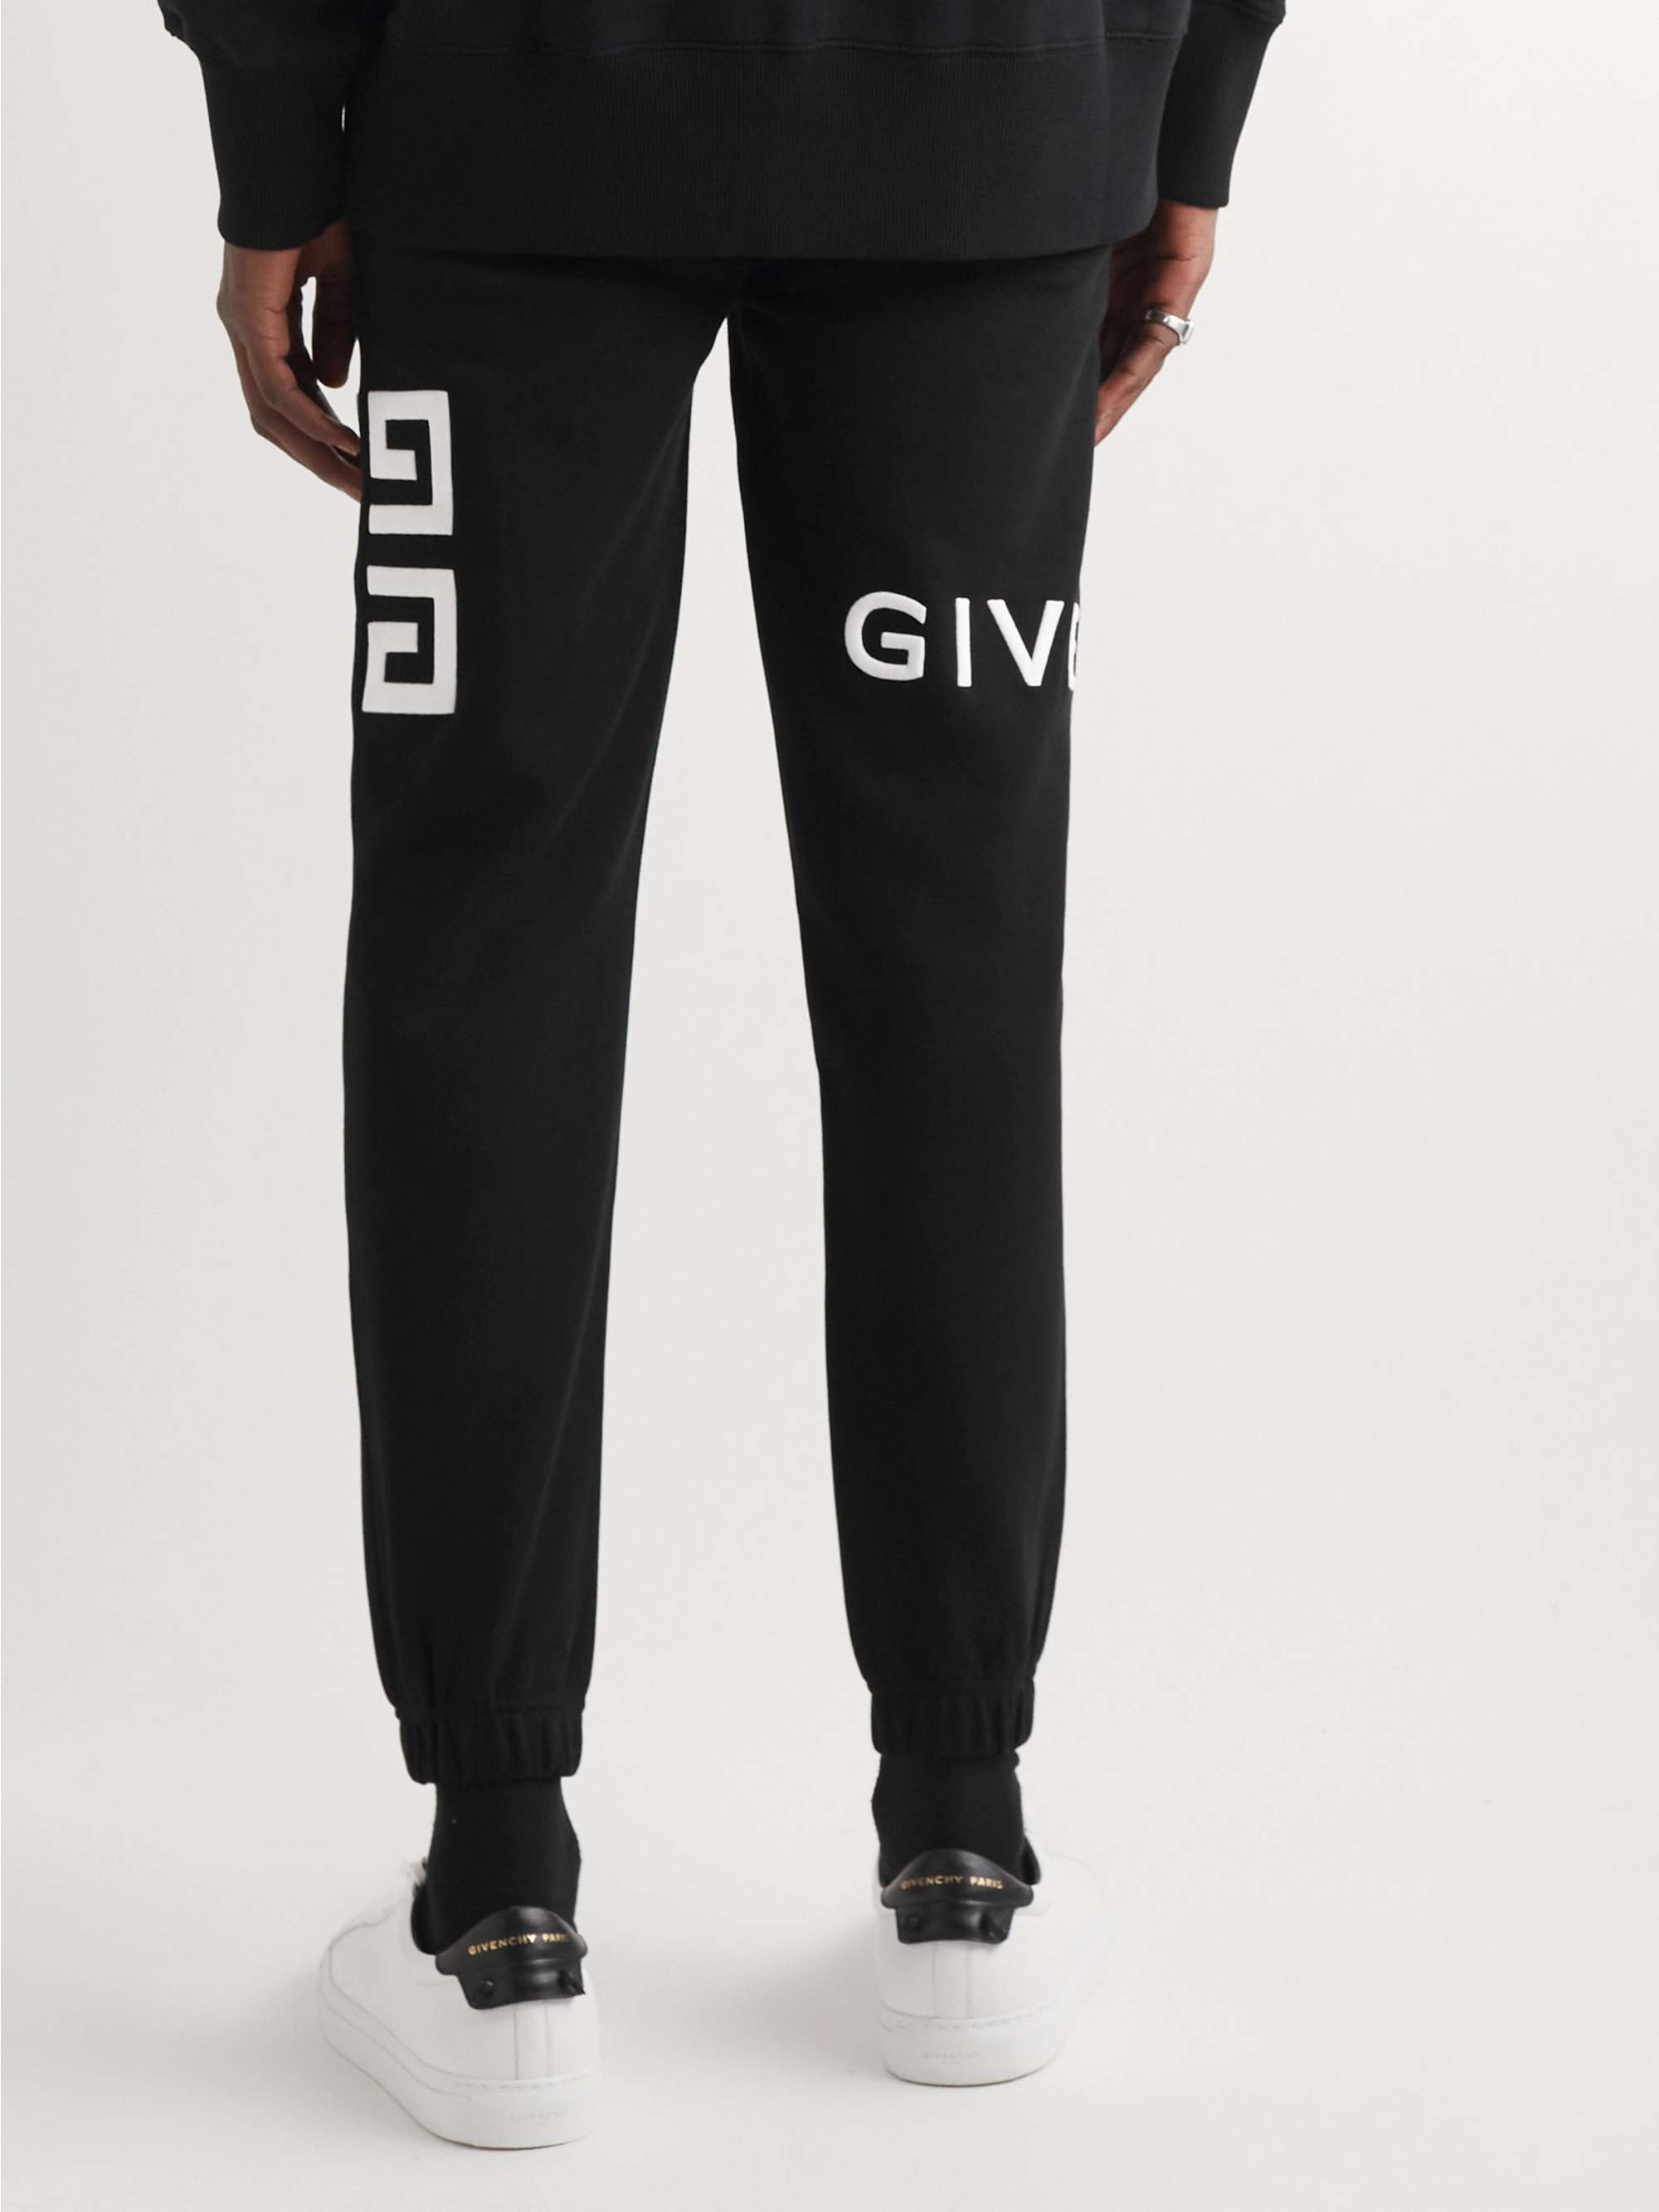 GIVENCHY Slim-Fit Logo-Embroidered Cotton-Jersey Sweatpants